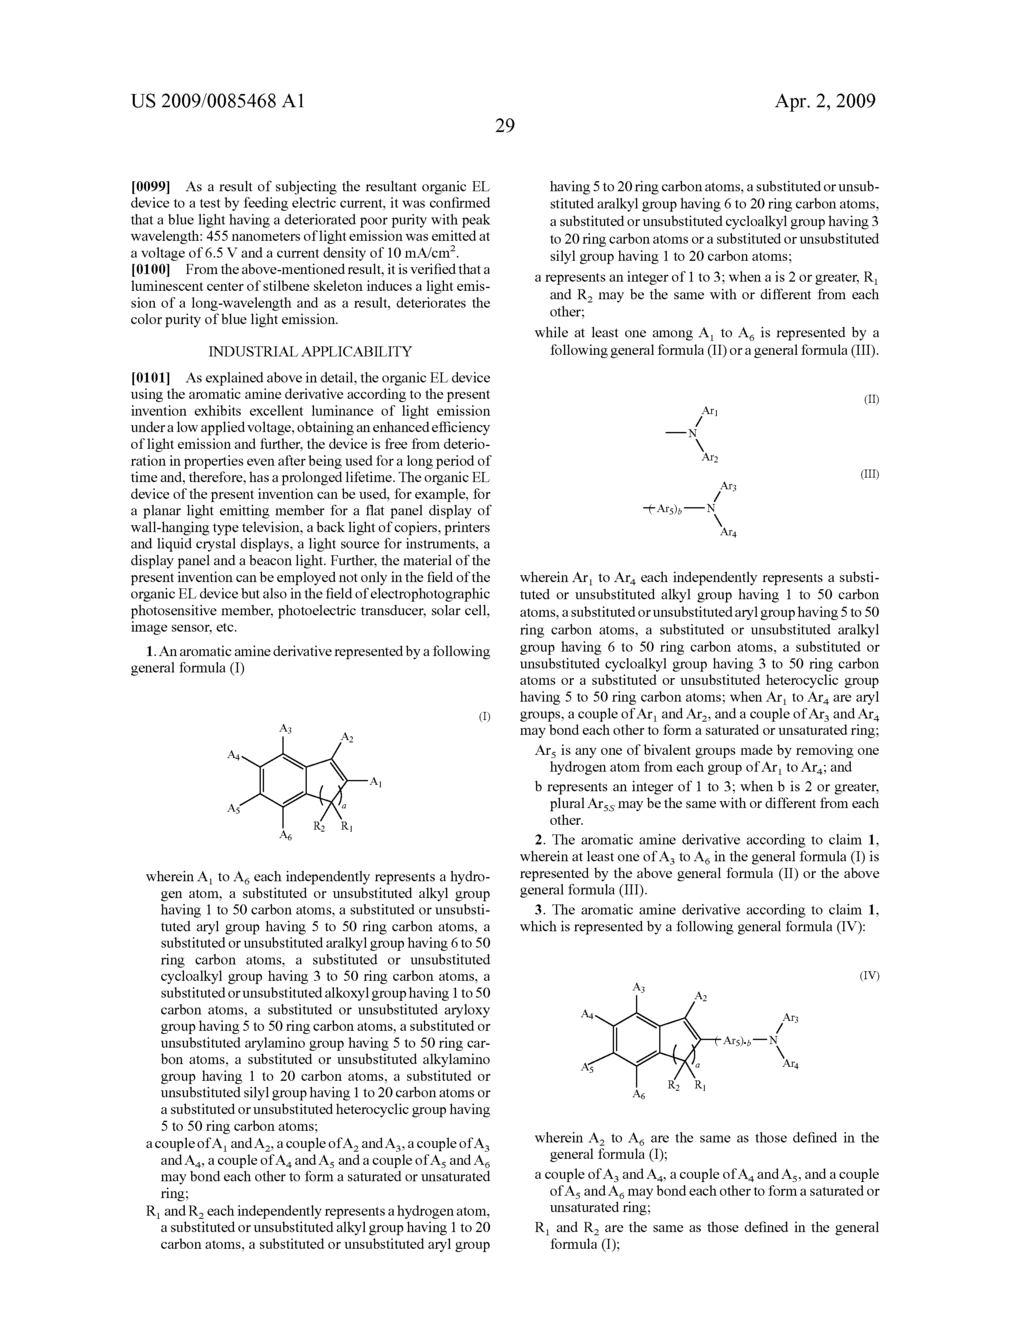 AROMATIC AMINE DERIVATIVES AND ORGANIC ELECTROLUMINESCENCE DEVICES USING THE SAME - diagram, schematic, and image 32